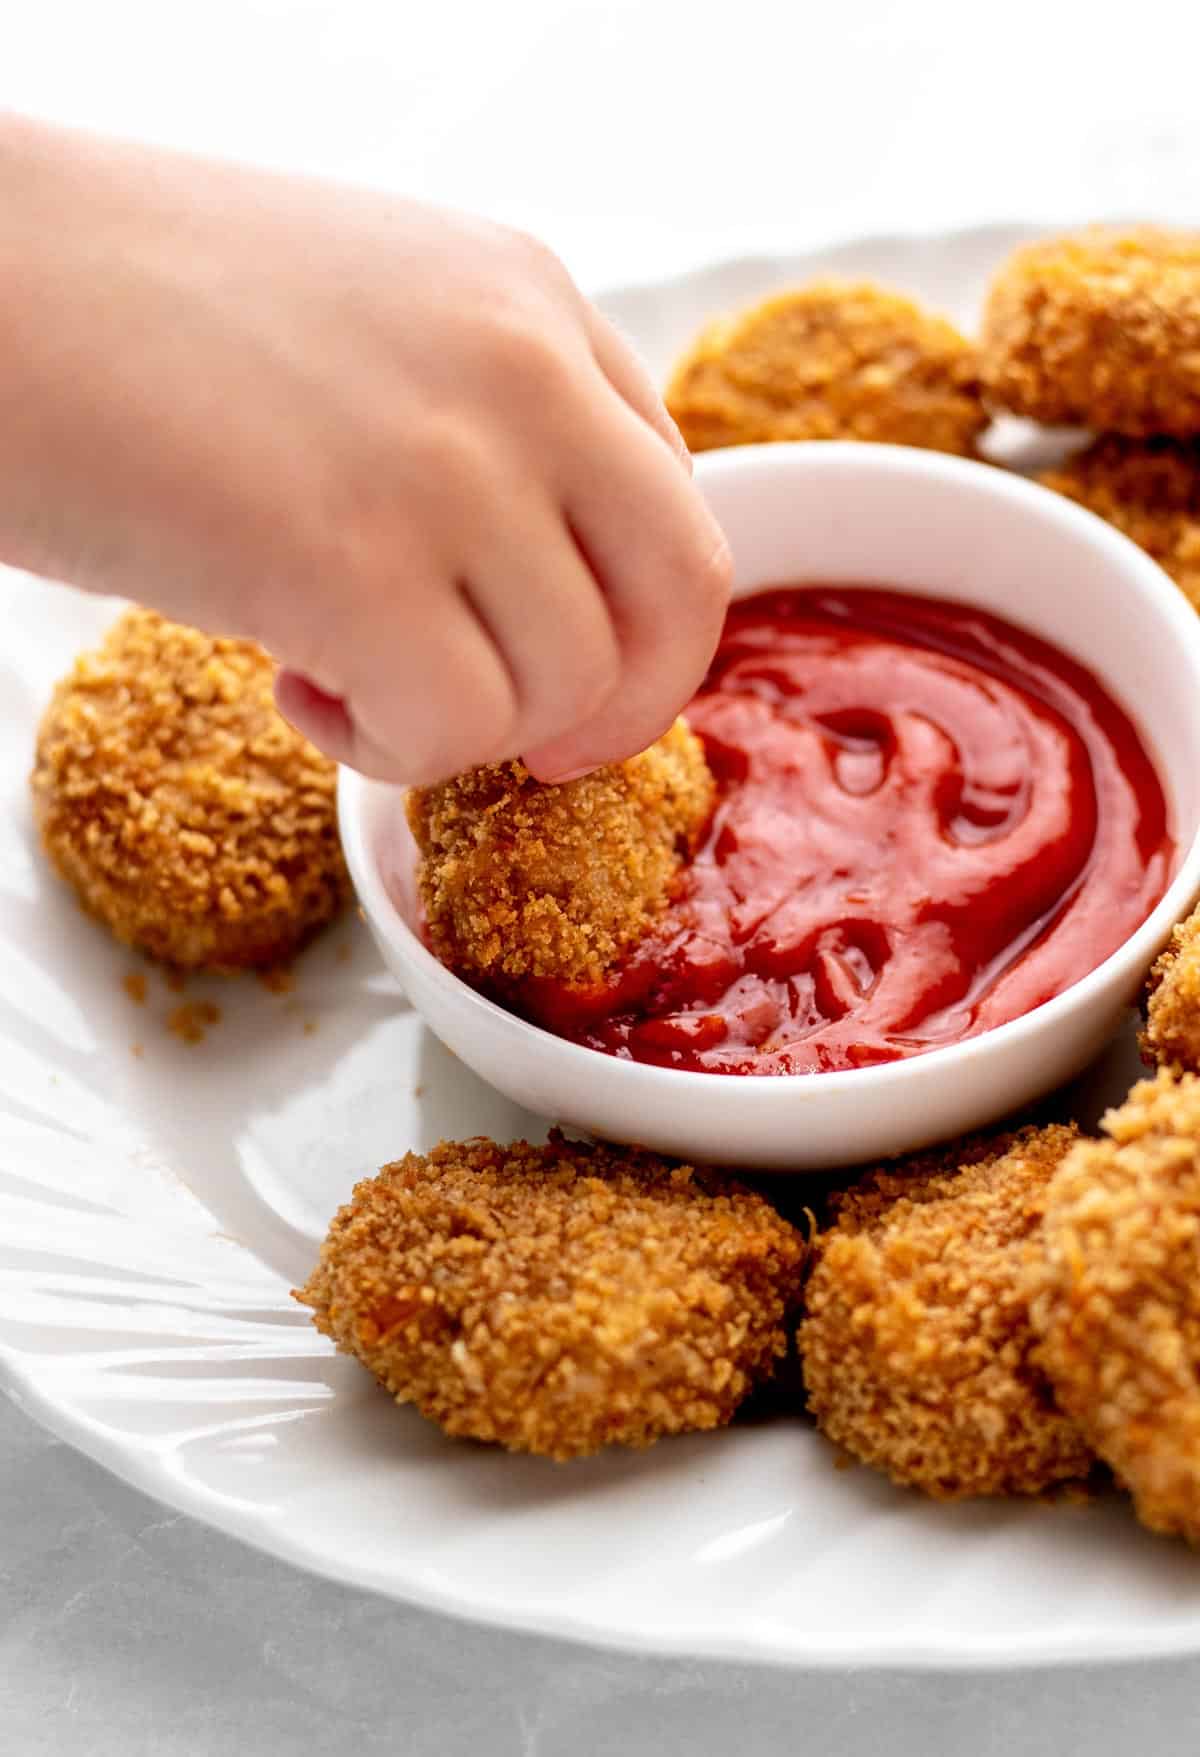 A child's hand dipping a chicken nugget into a bowl of ketchup.